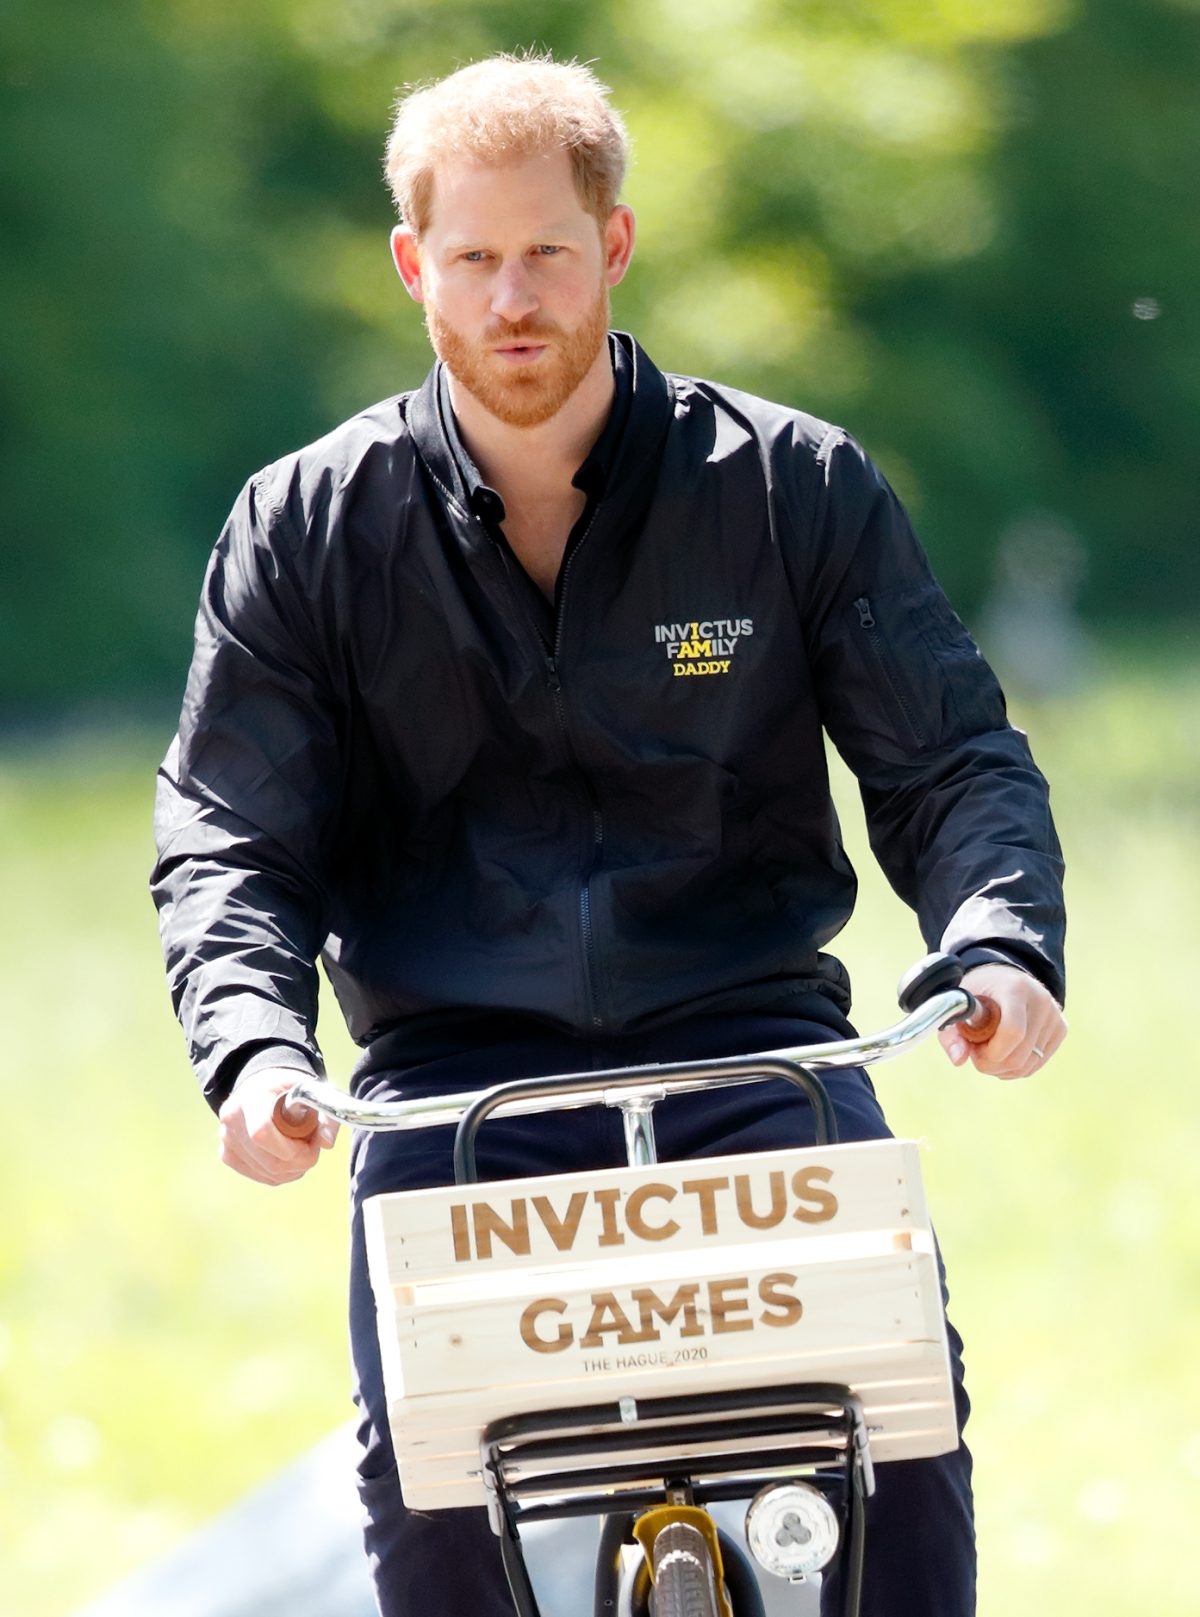 Prince Harry rides a bicycle around Sportcampus Zuiderpark as part of a programme of events to mark the official launch of the Invictus Games The Hague 2020